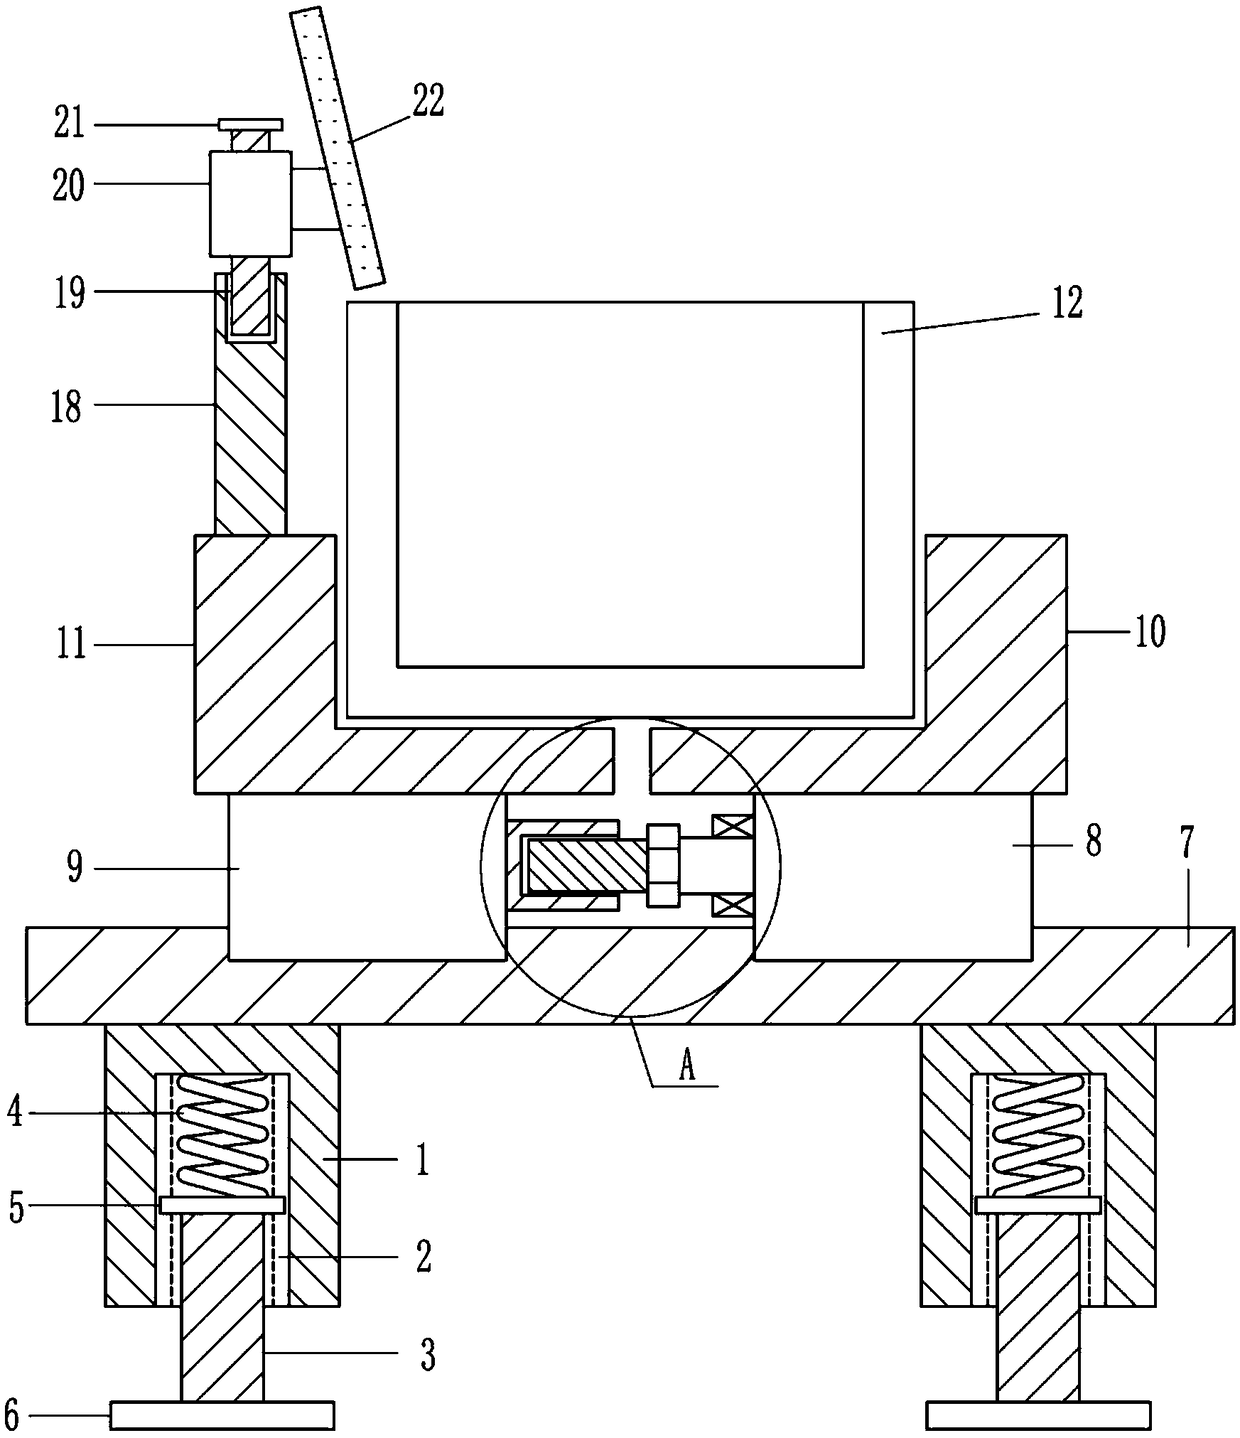 Pouring die storing device for steel manufacturing